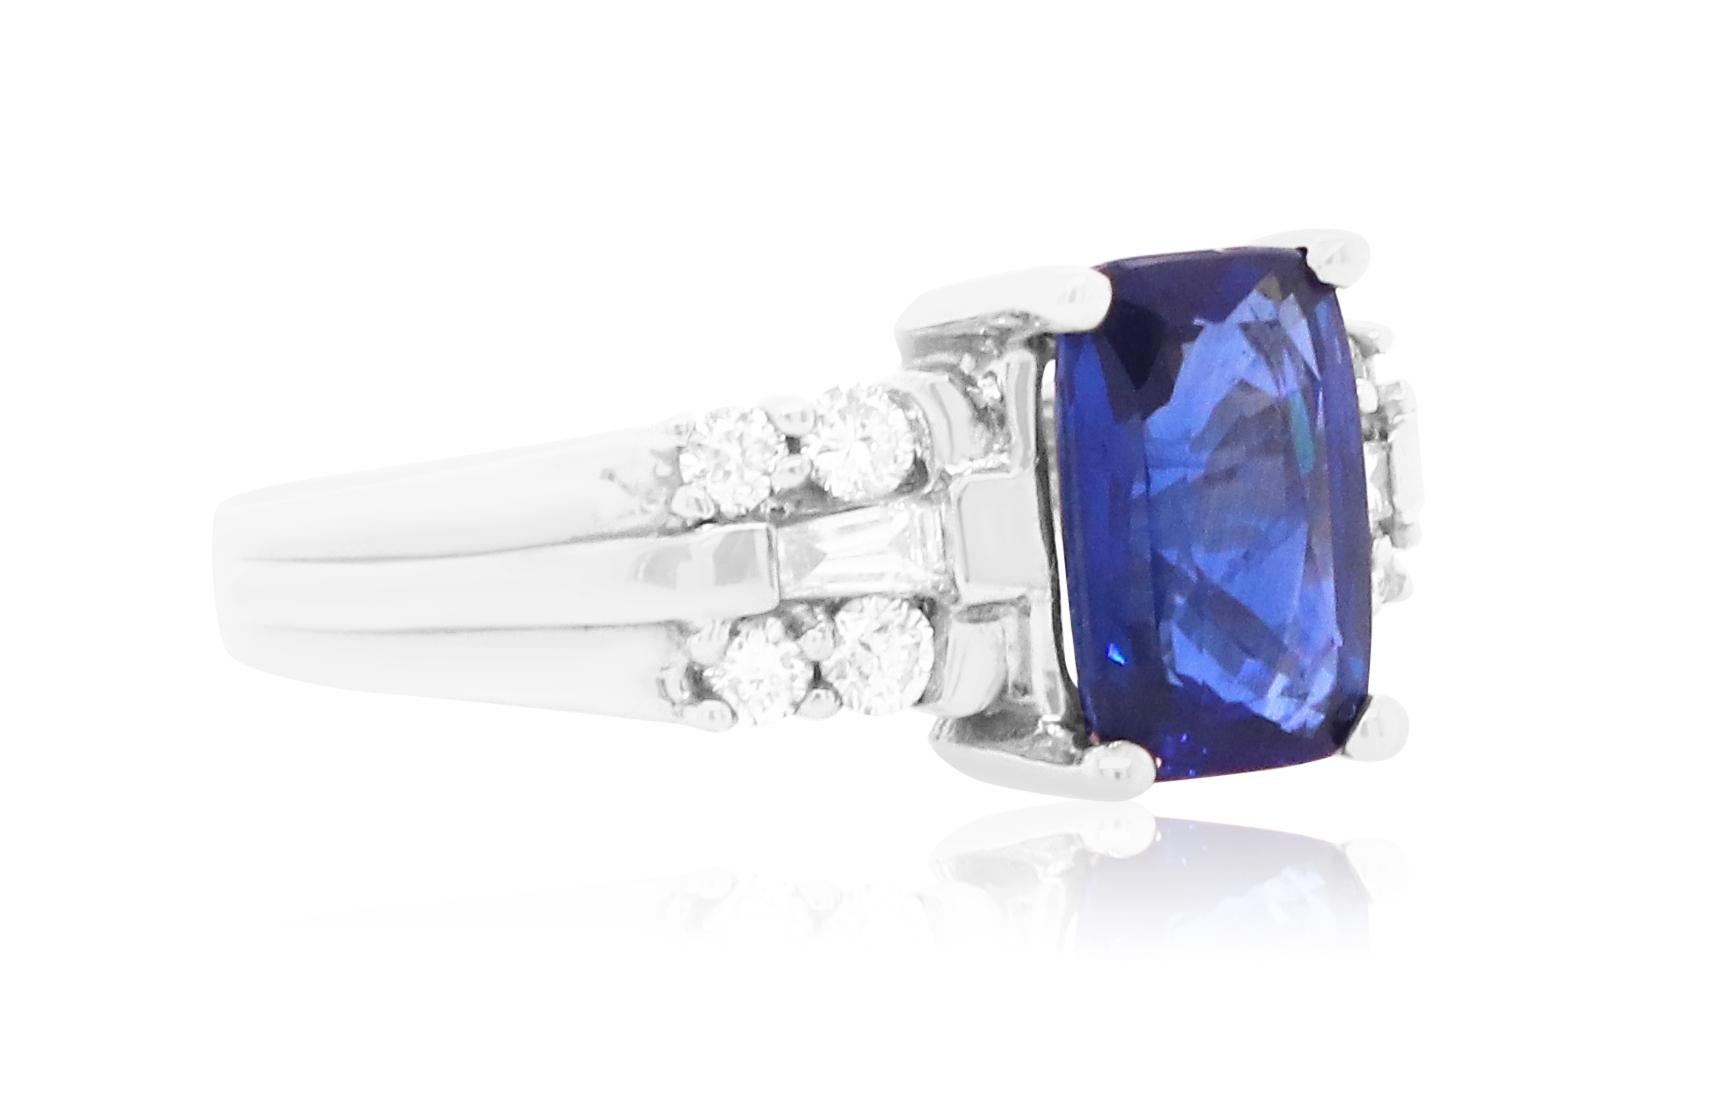 Material: 18k White Gold 
Center Stone Details:  1 Cushion Cut Blue Sapphire at 2 Carats 
Mounting Diamond Details: 2 Baguette Diamonds at 0.10 Carats - Clarity: VS-SI / Color: G-H
Diamond Details: 8 Brilliant Round White Diamonds at Approximately